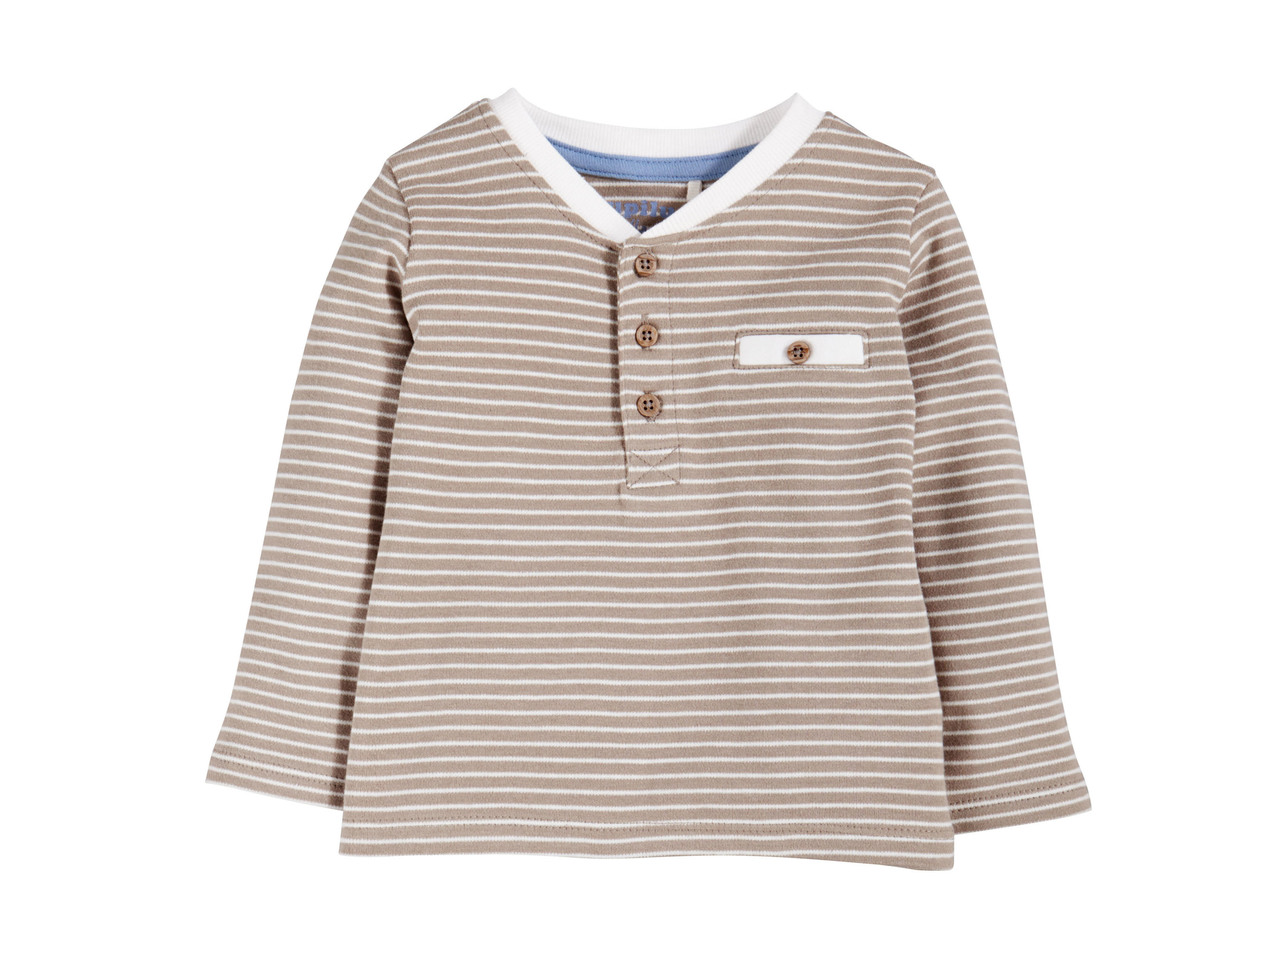 Long-Sleeved Top for Baby Boys